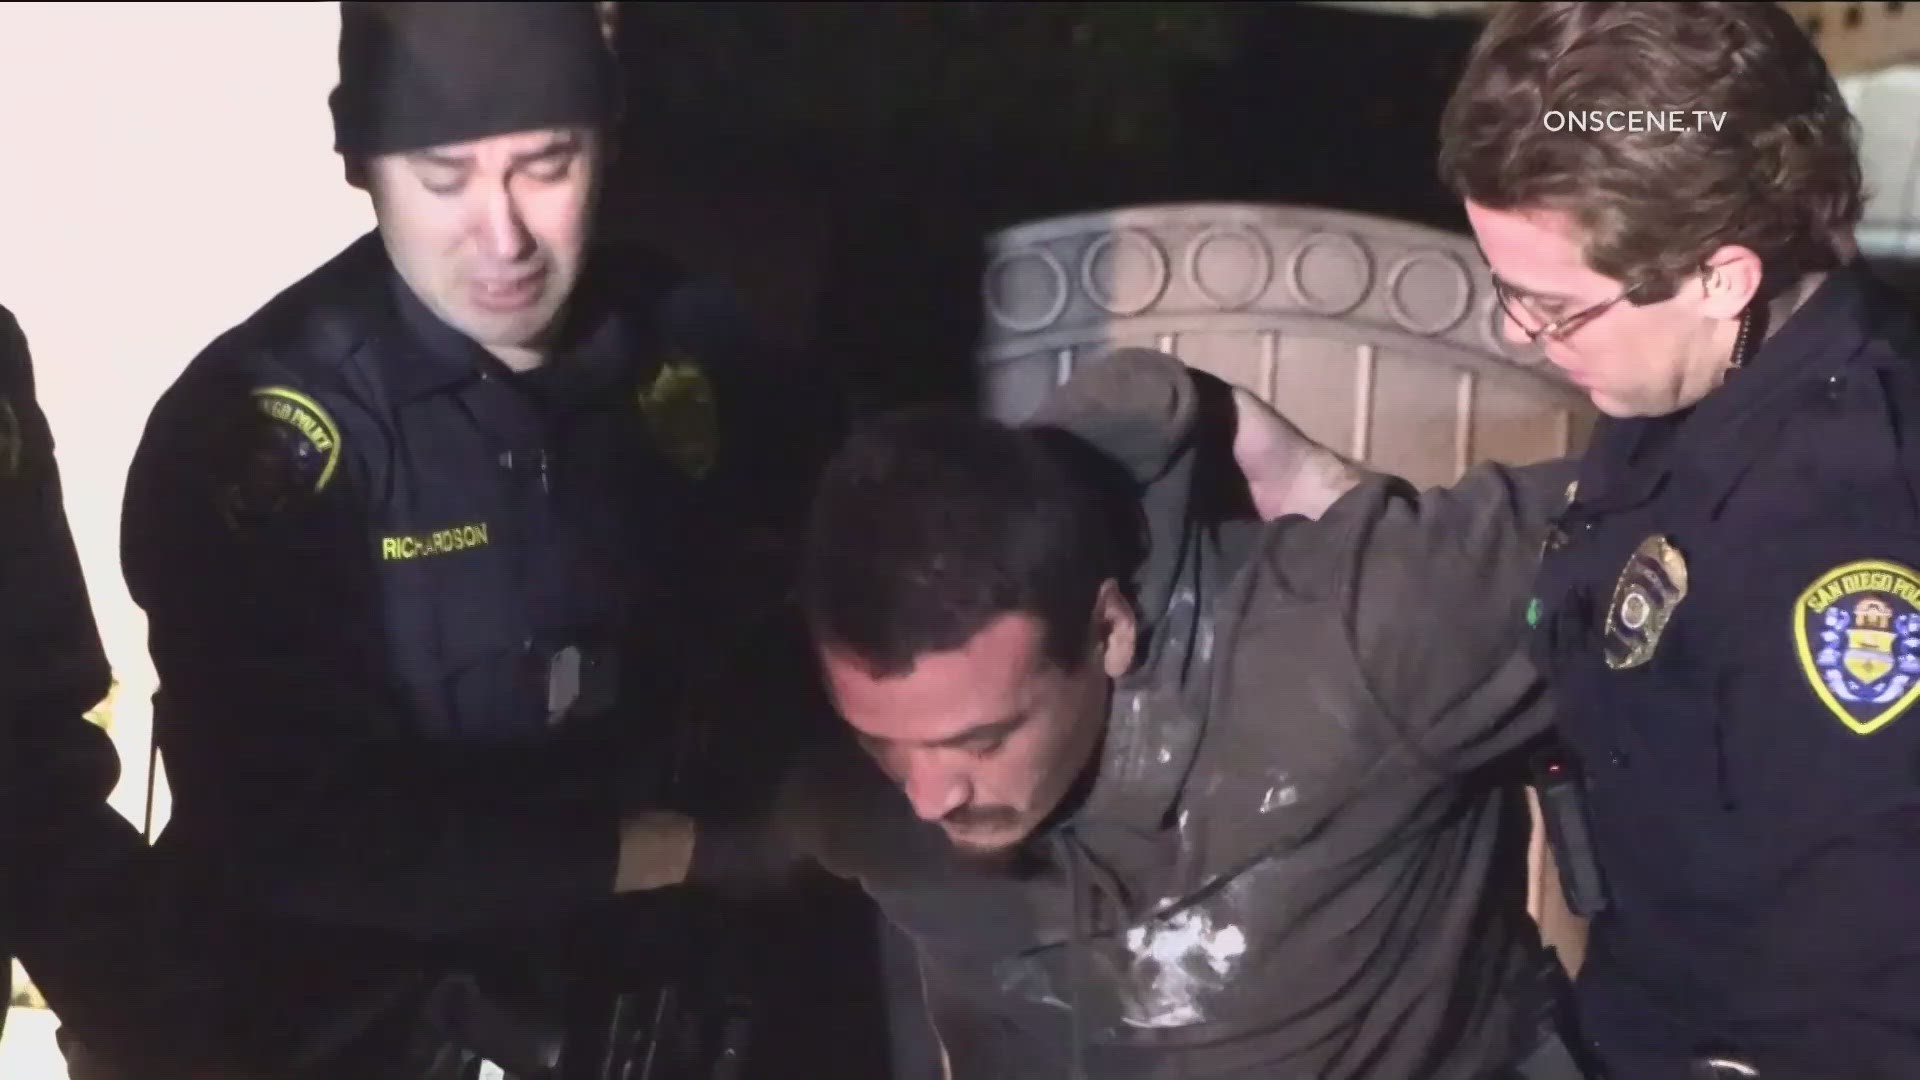 San Diego police fired pepper balls at a suspect in an Alta Vista neighborhood to bring him into custody after he led officers on a pursuit in a stolen vehicle.